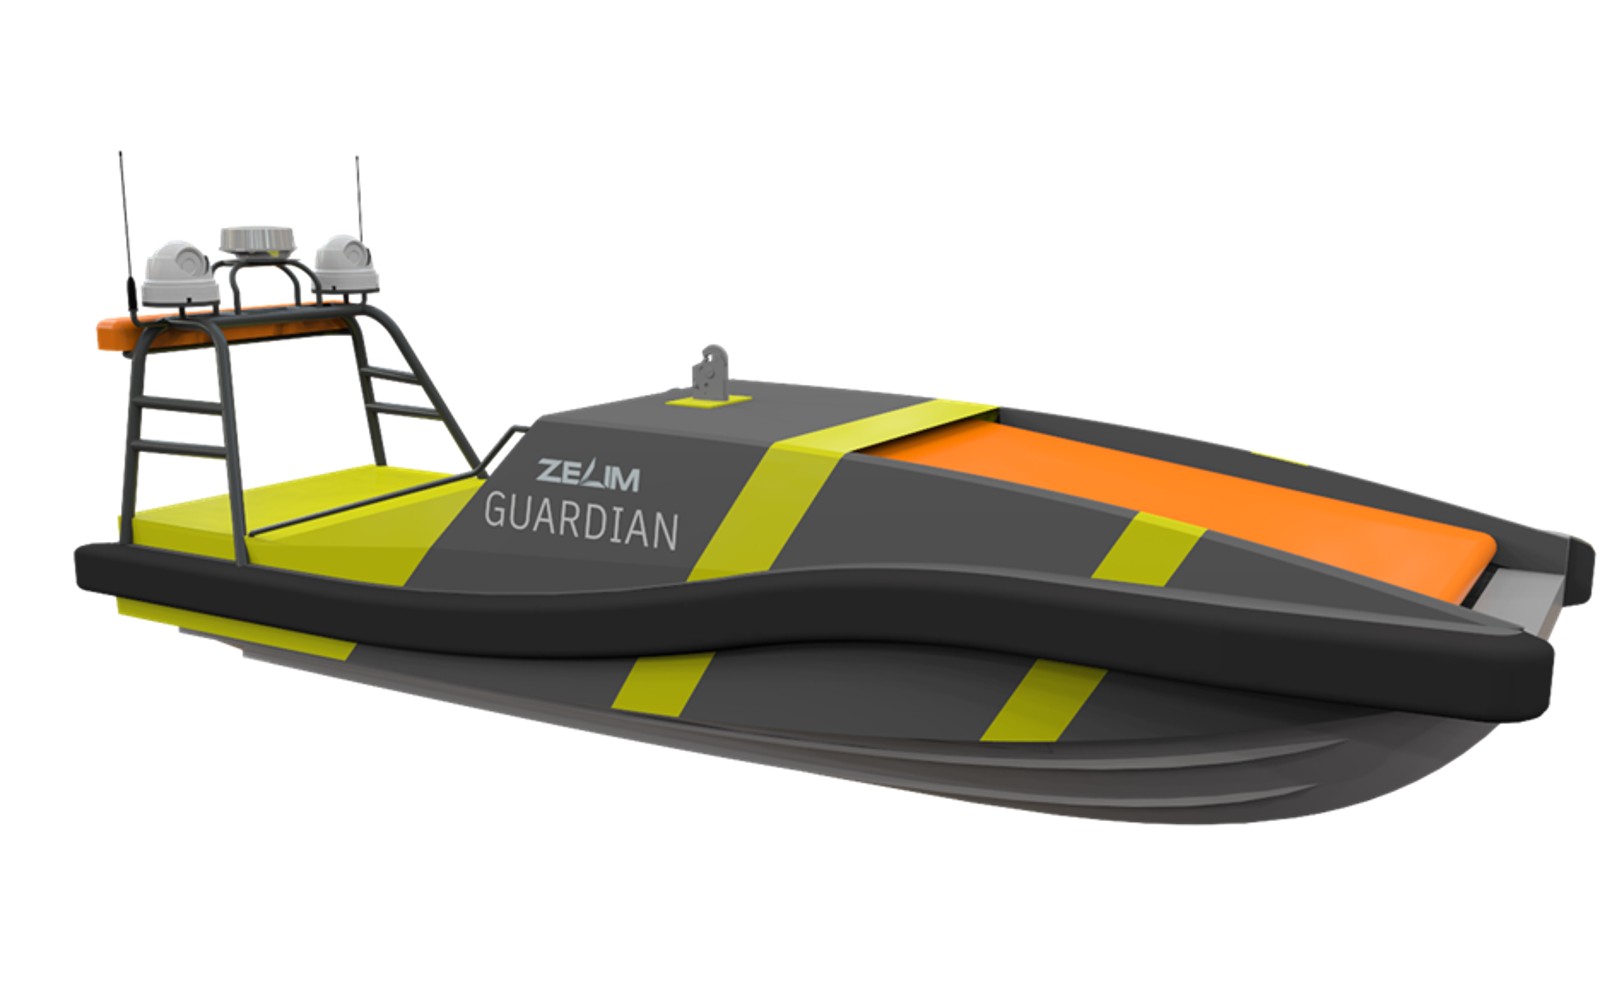 The Zelim Guardian is an automated search and rescue craft